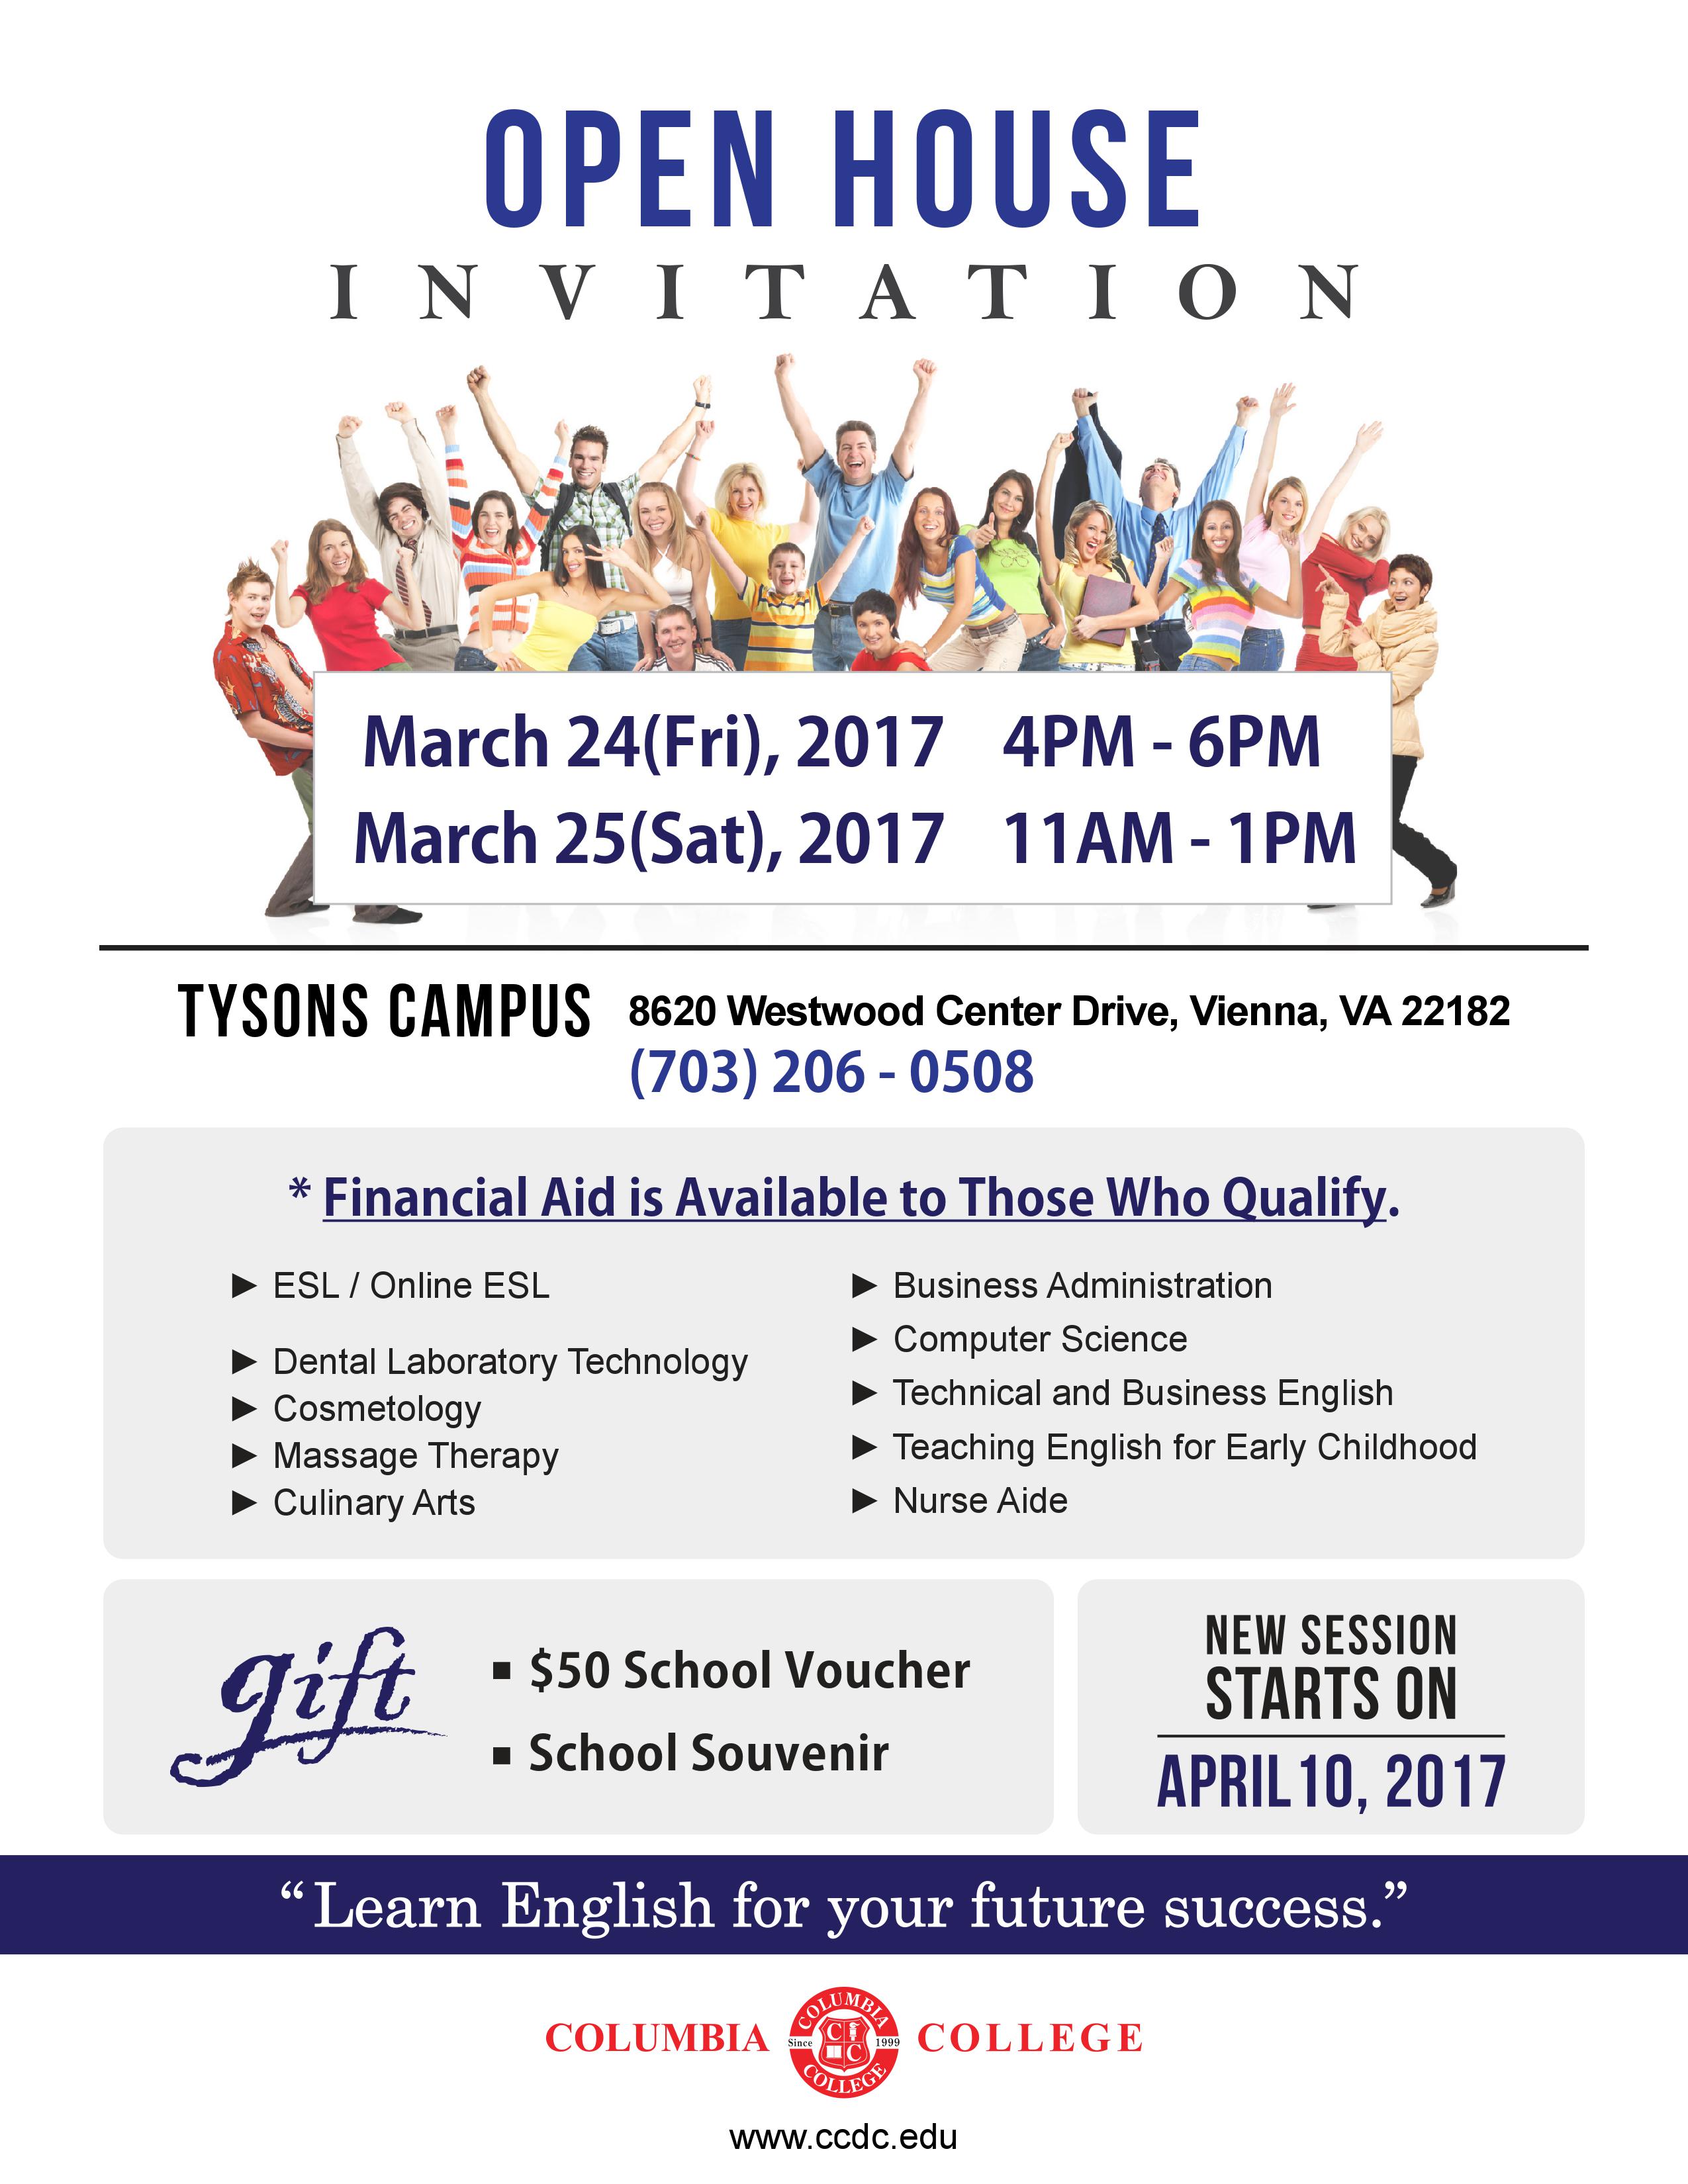 Open House @ TYSONS, March 24-25 - Columbia College